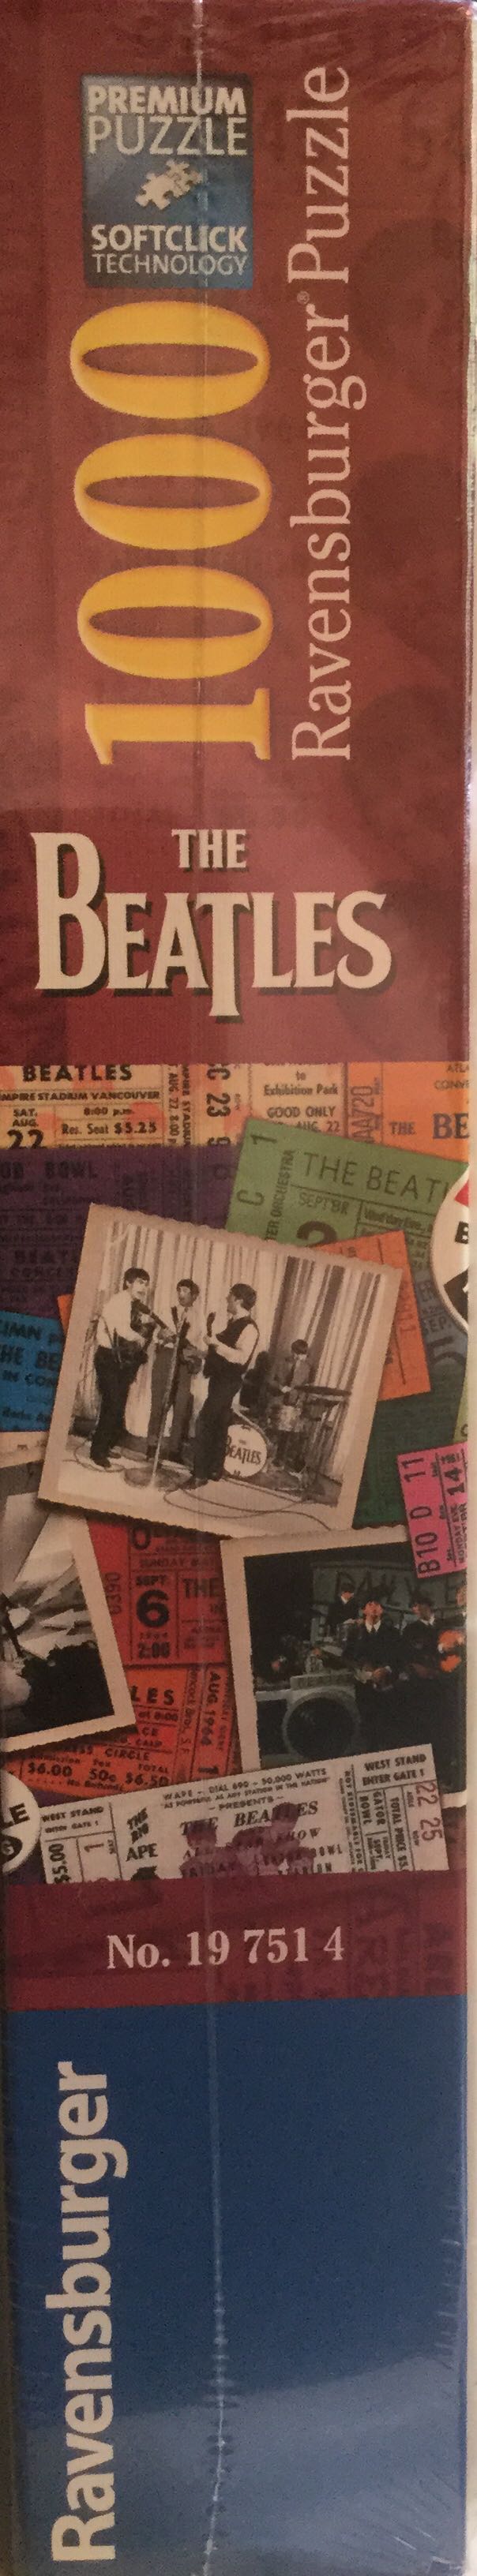 The Beatles Tickets - Ravensburger puzzle collectible [Barcode 4005556197514] - Main Image 4